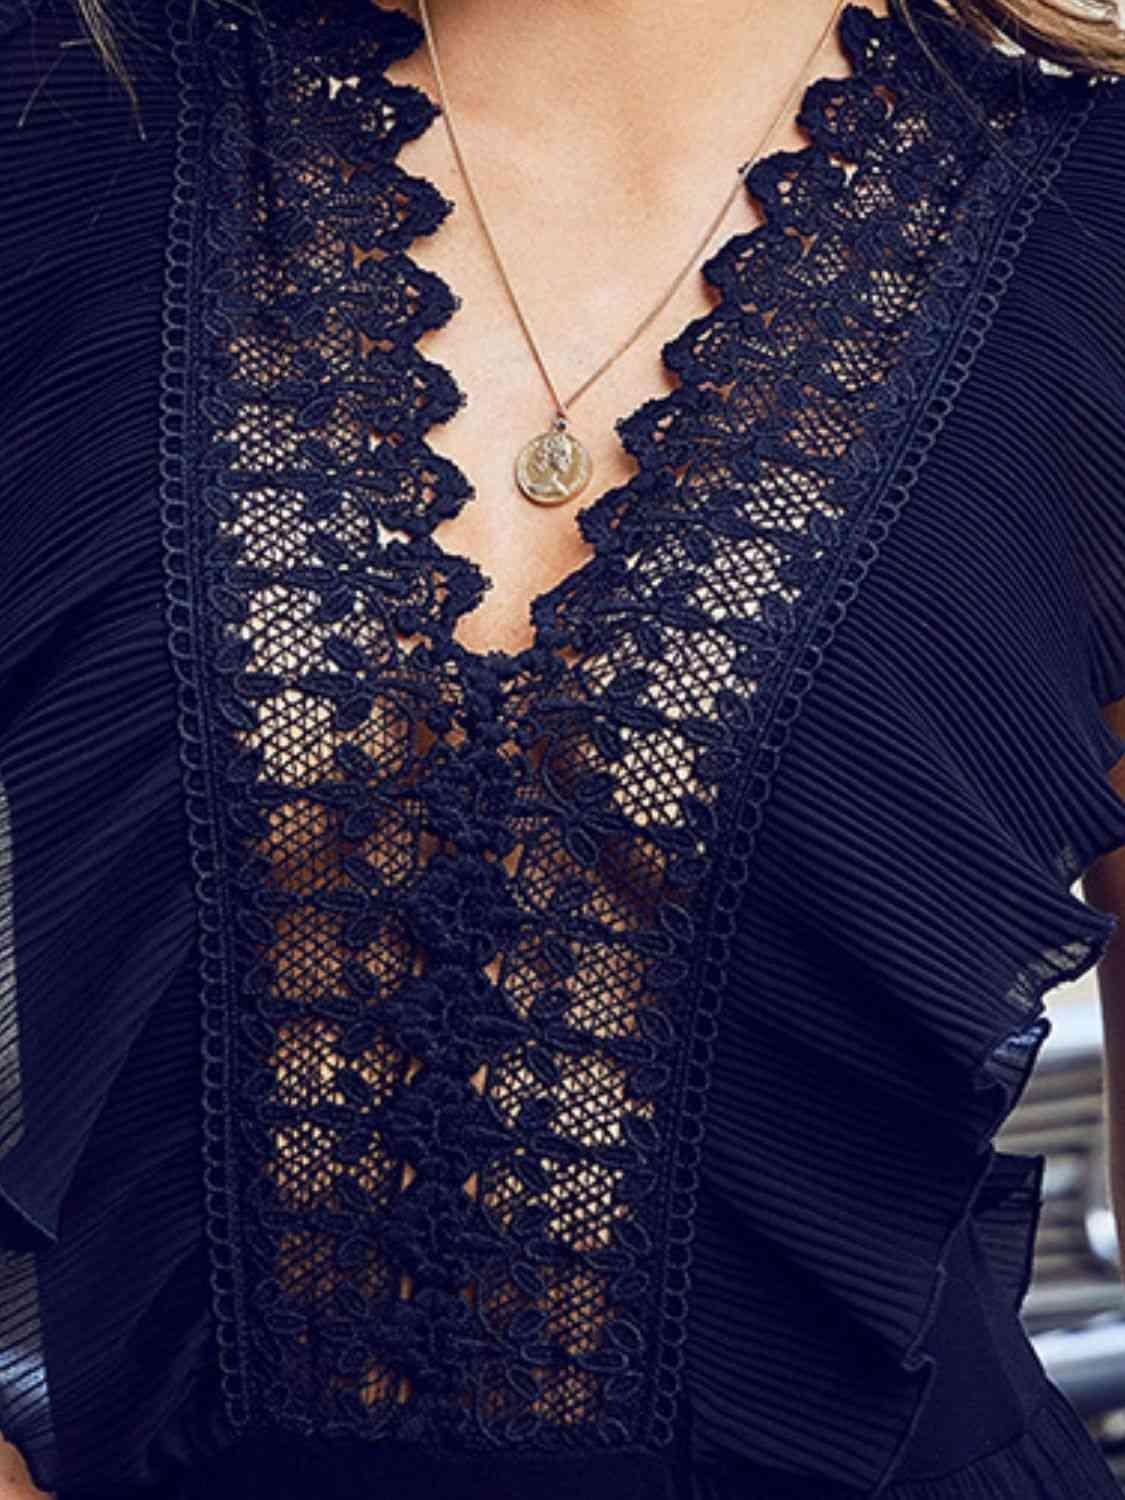 a close up of a woman wearing a black top